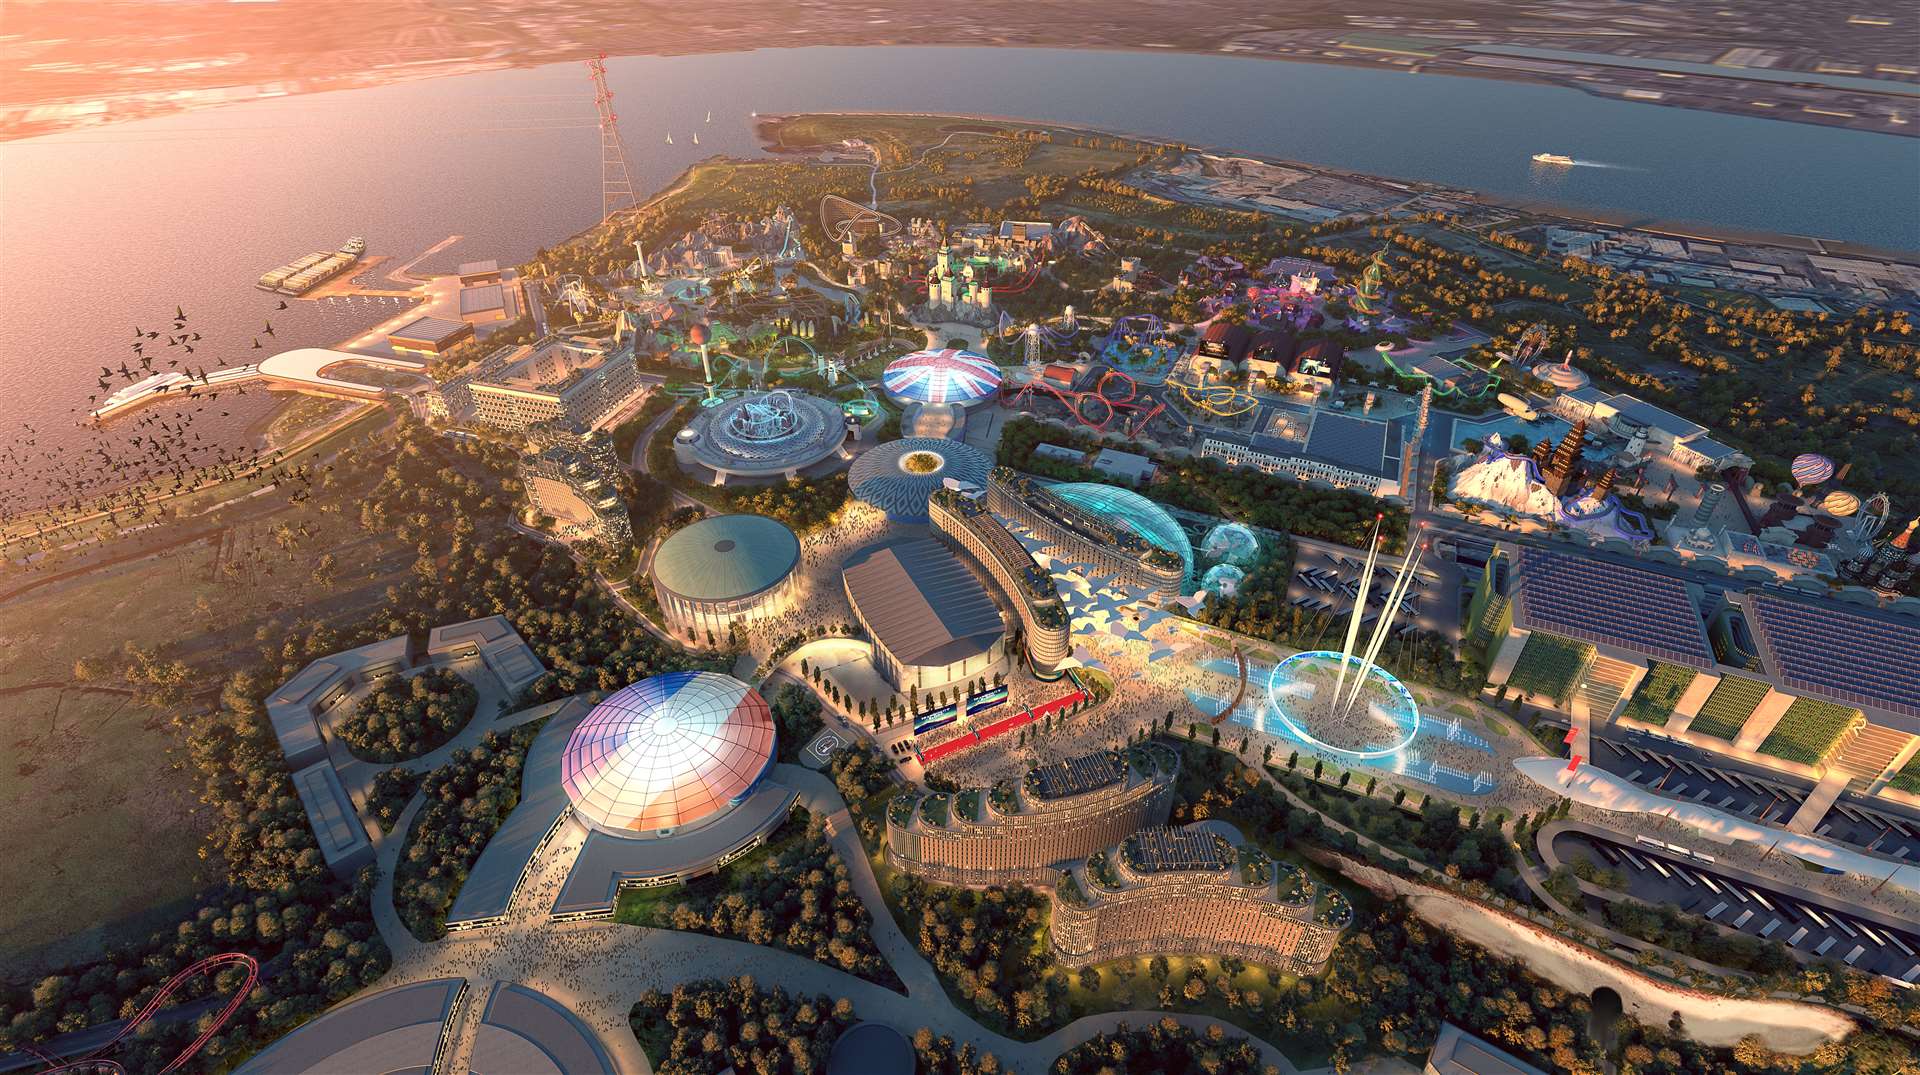 The latest detailed artist impression of what the London Resort theme park will look like